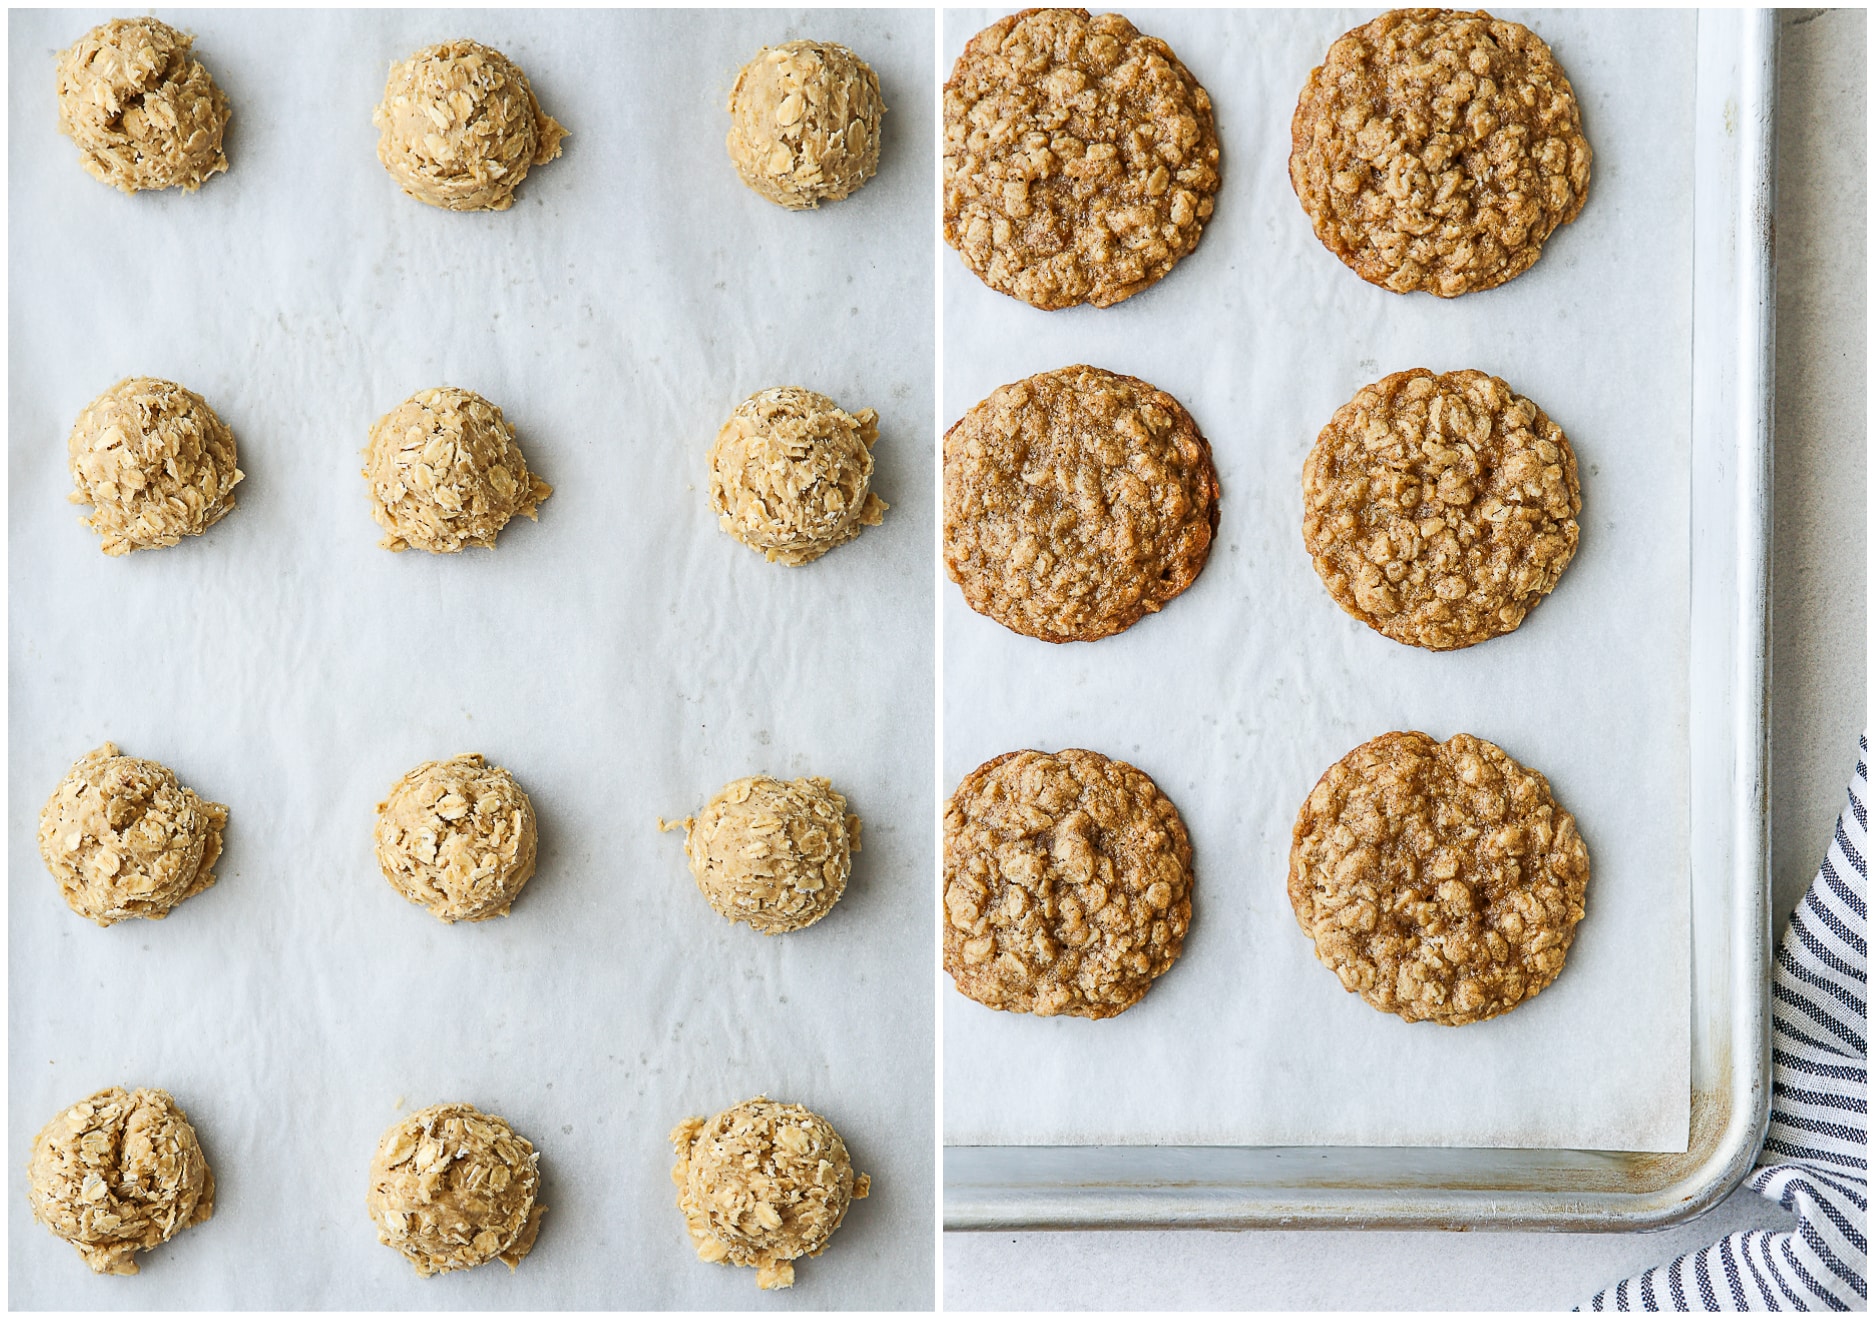 oatmeal cookies before and after baking